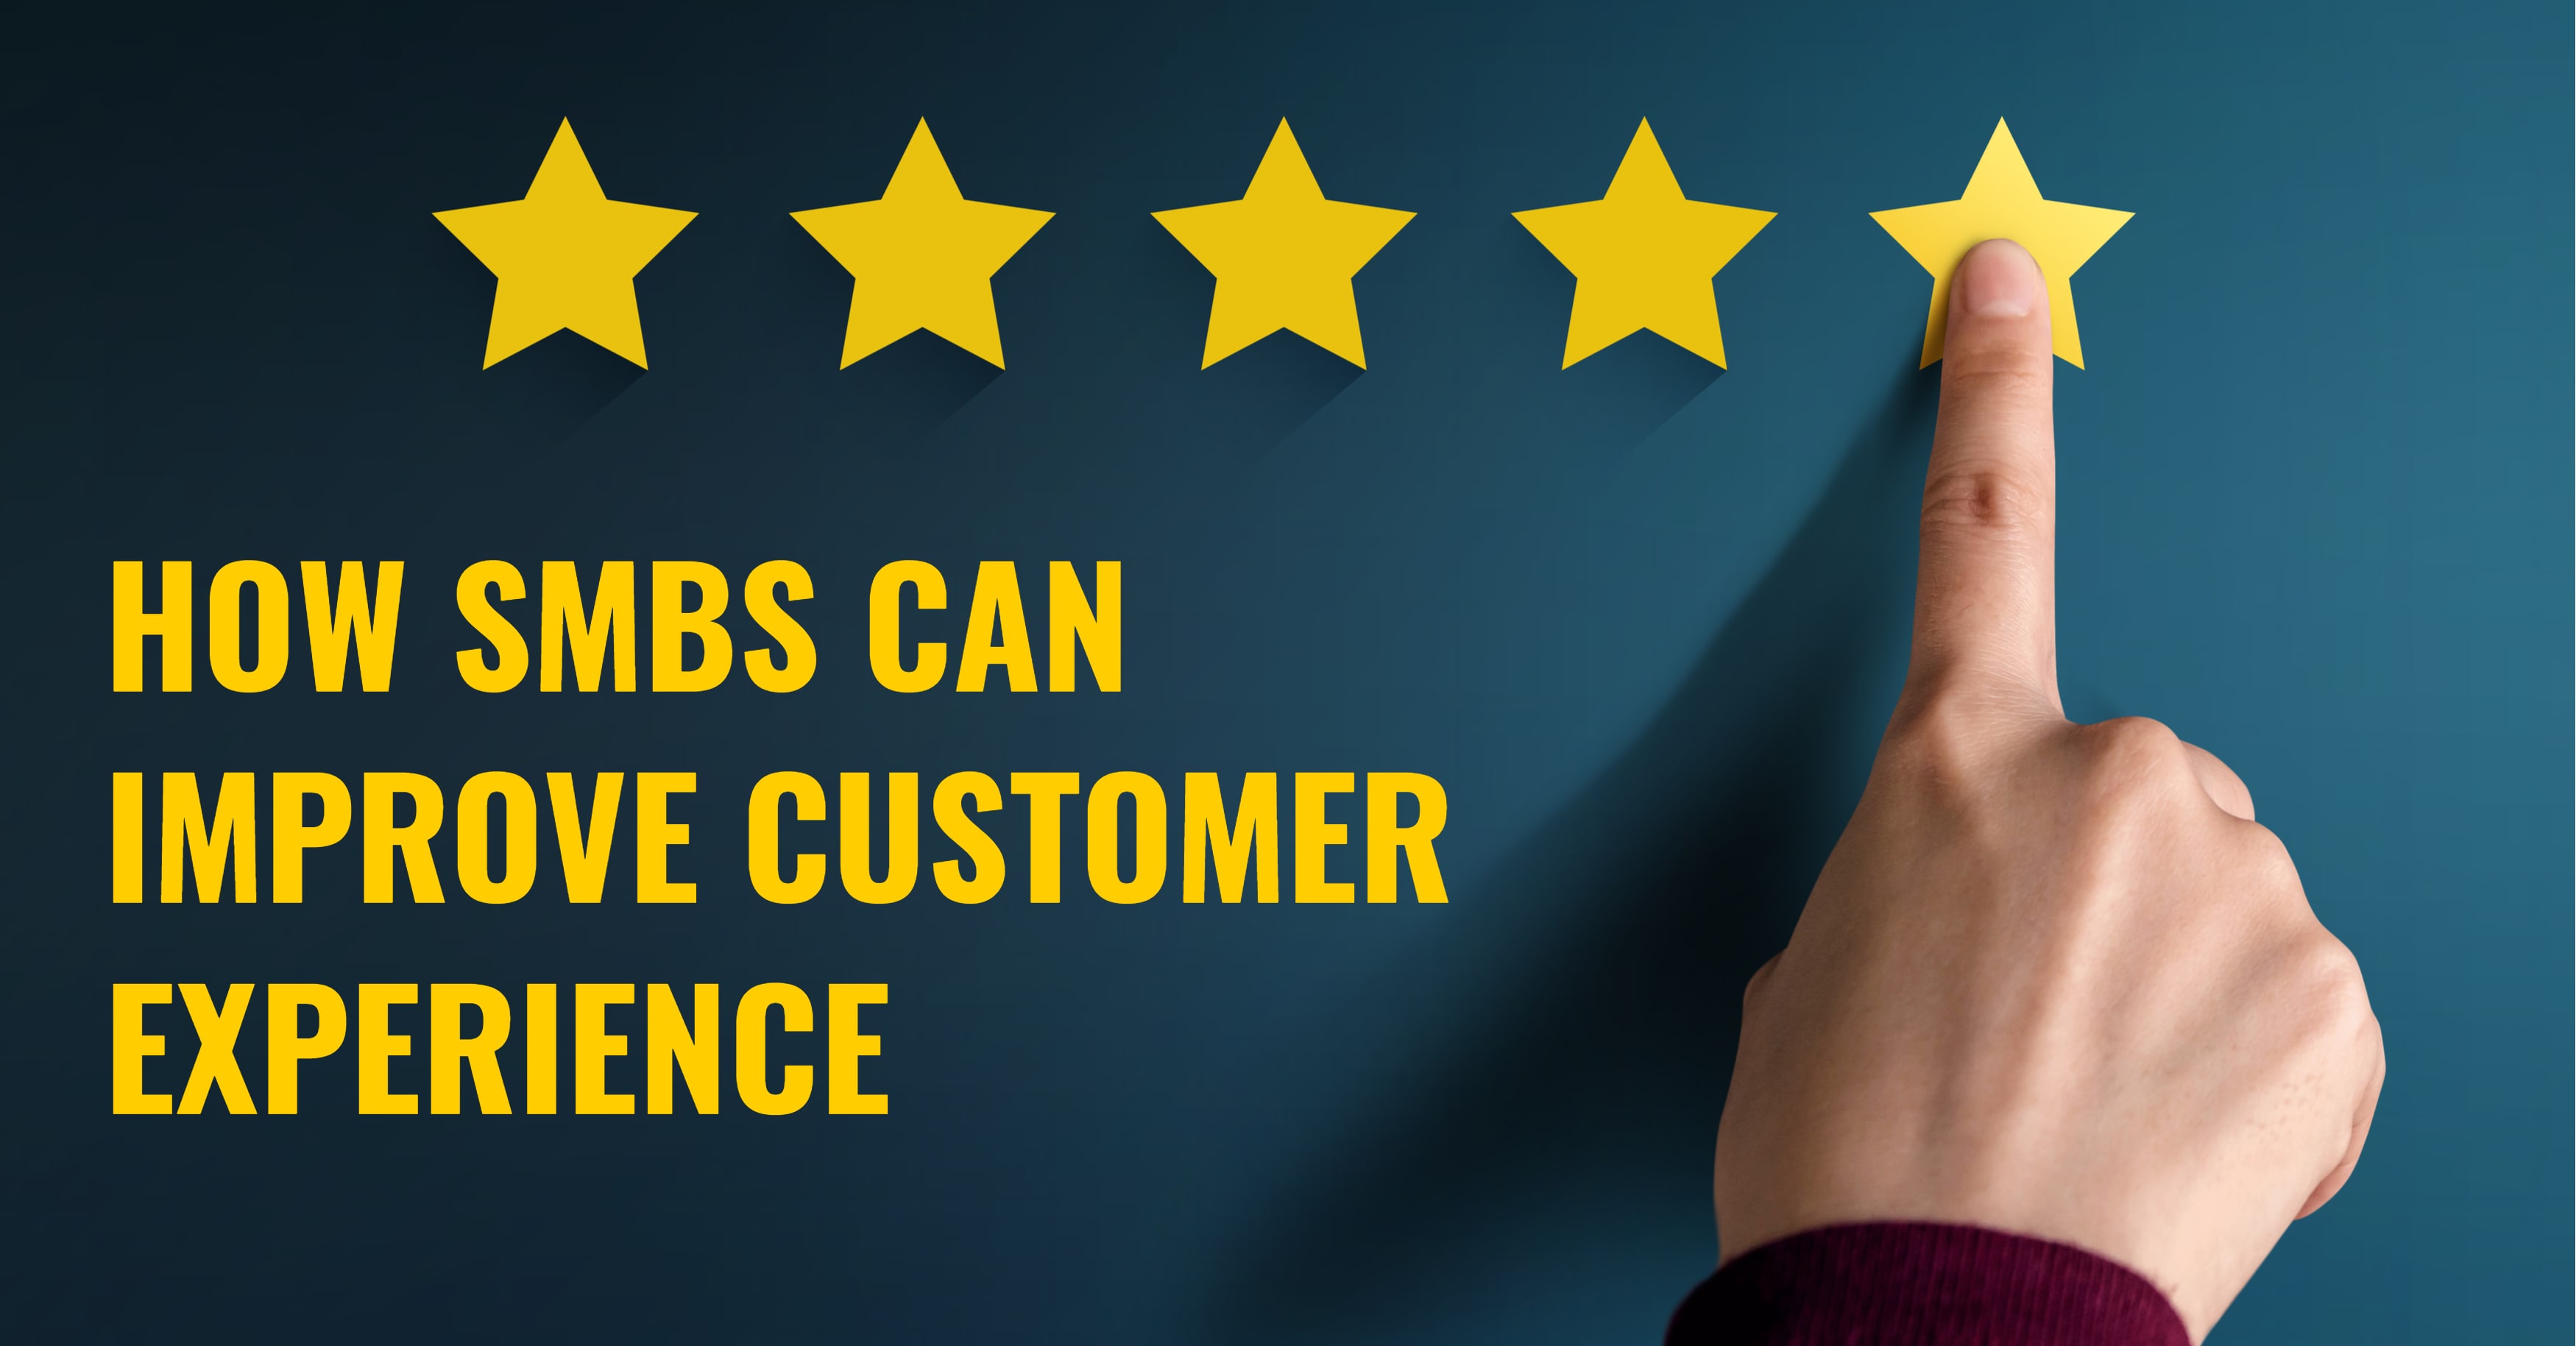 How SMBs Can Improve Customer Experience